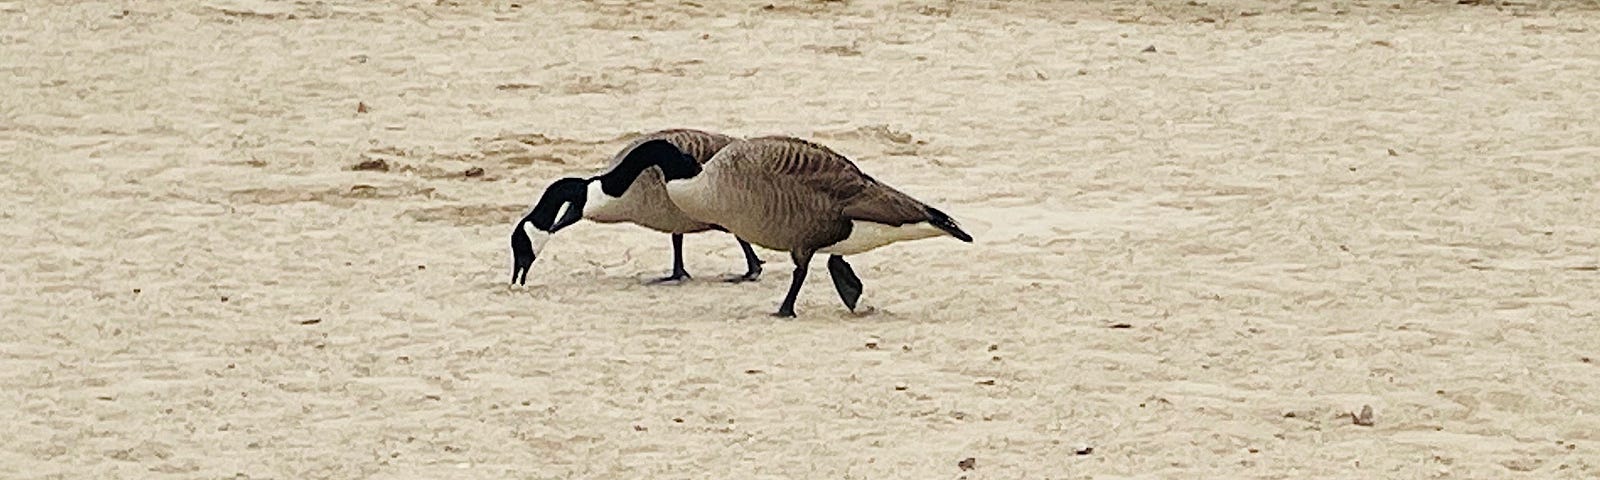 Two geese on a sandy beach